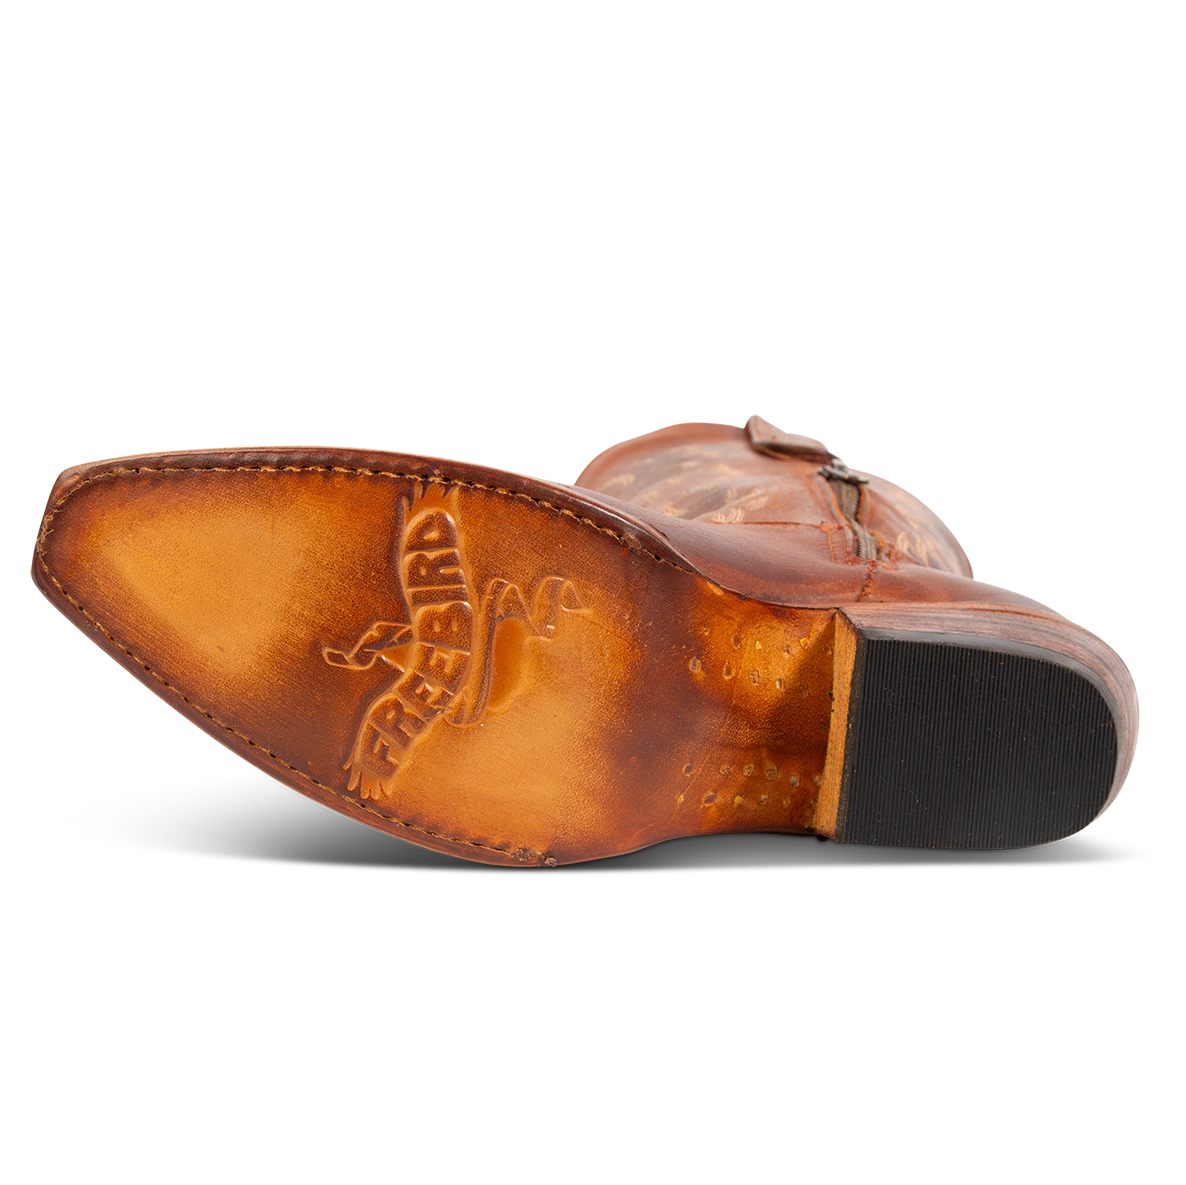 Cognac leather sole imprinted with FREEBIRD on women's Wilson Cognac leather western boot